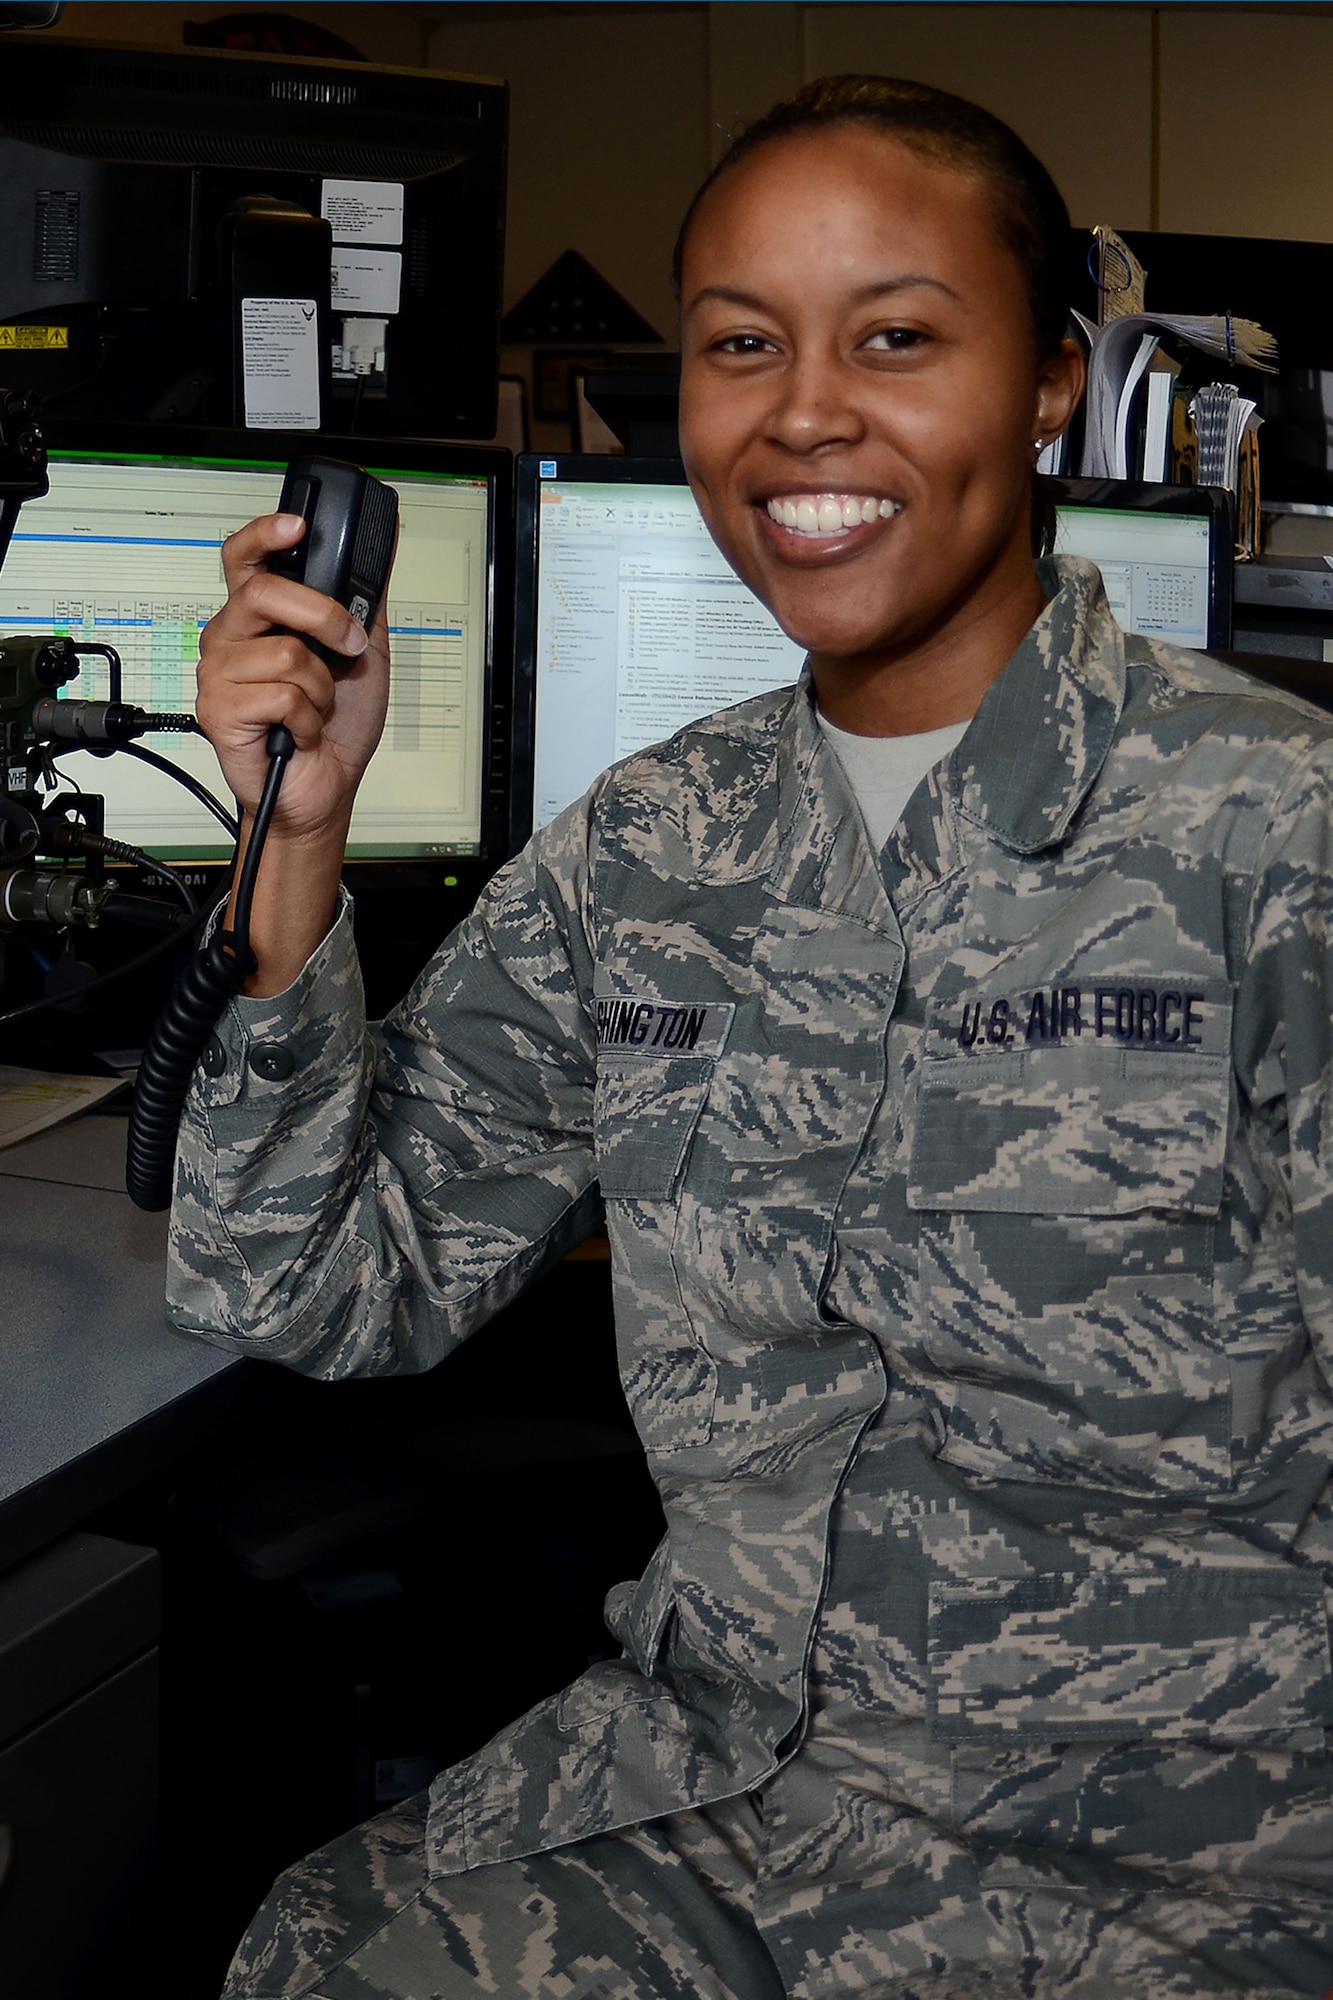 U.S. Air Force Staff Sgt. Latoya Washington, an aviation resource management specialist assigned to the 169th Fighter Wing, South Carolina Air National Guard at McEntire Joint National Guard Base, S.C., Mar. 11, 2016. (U.S. Air National Guard photo by Senior Airman Ashleigh S. Pavelek)